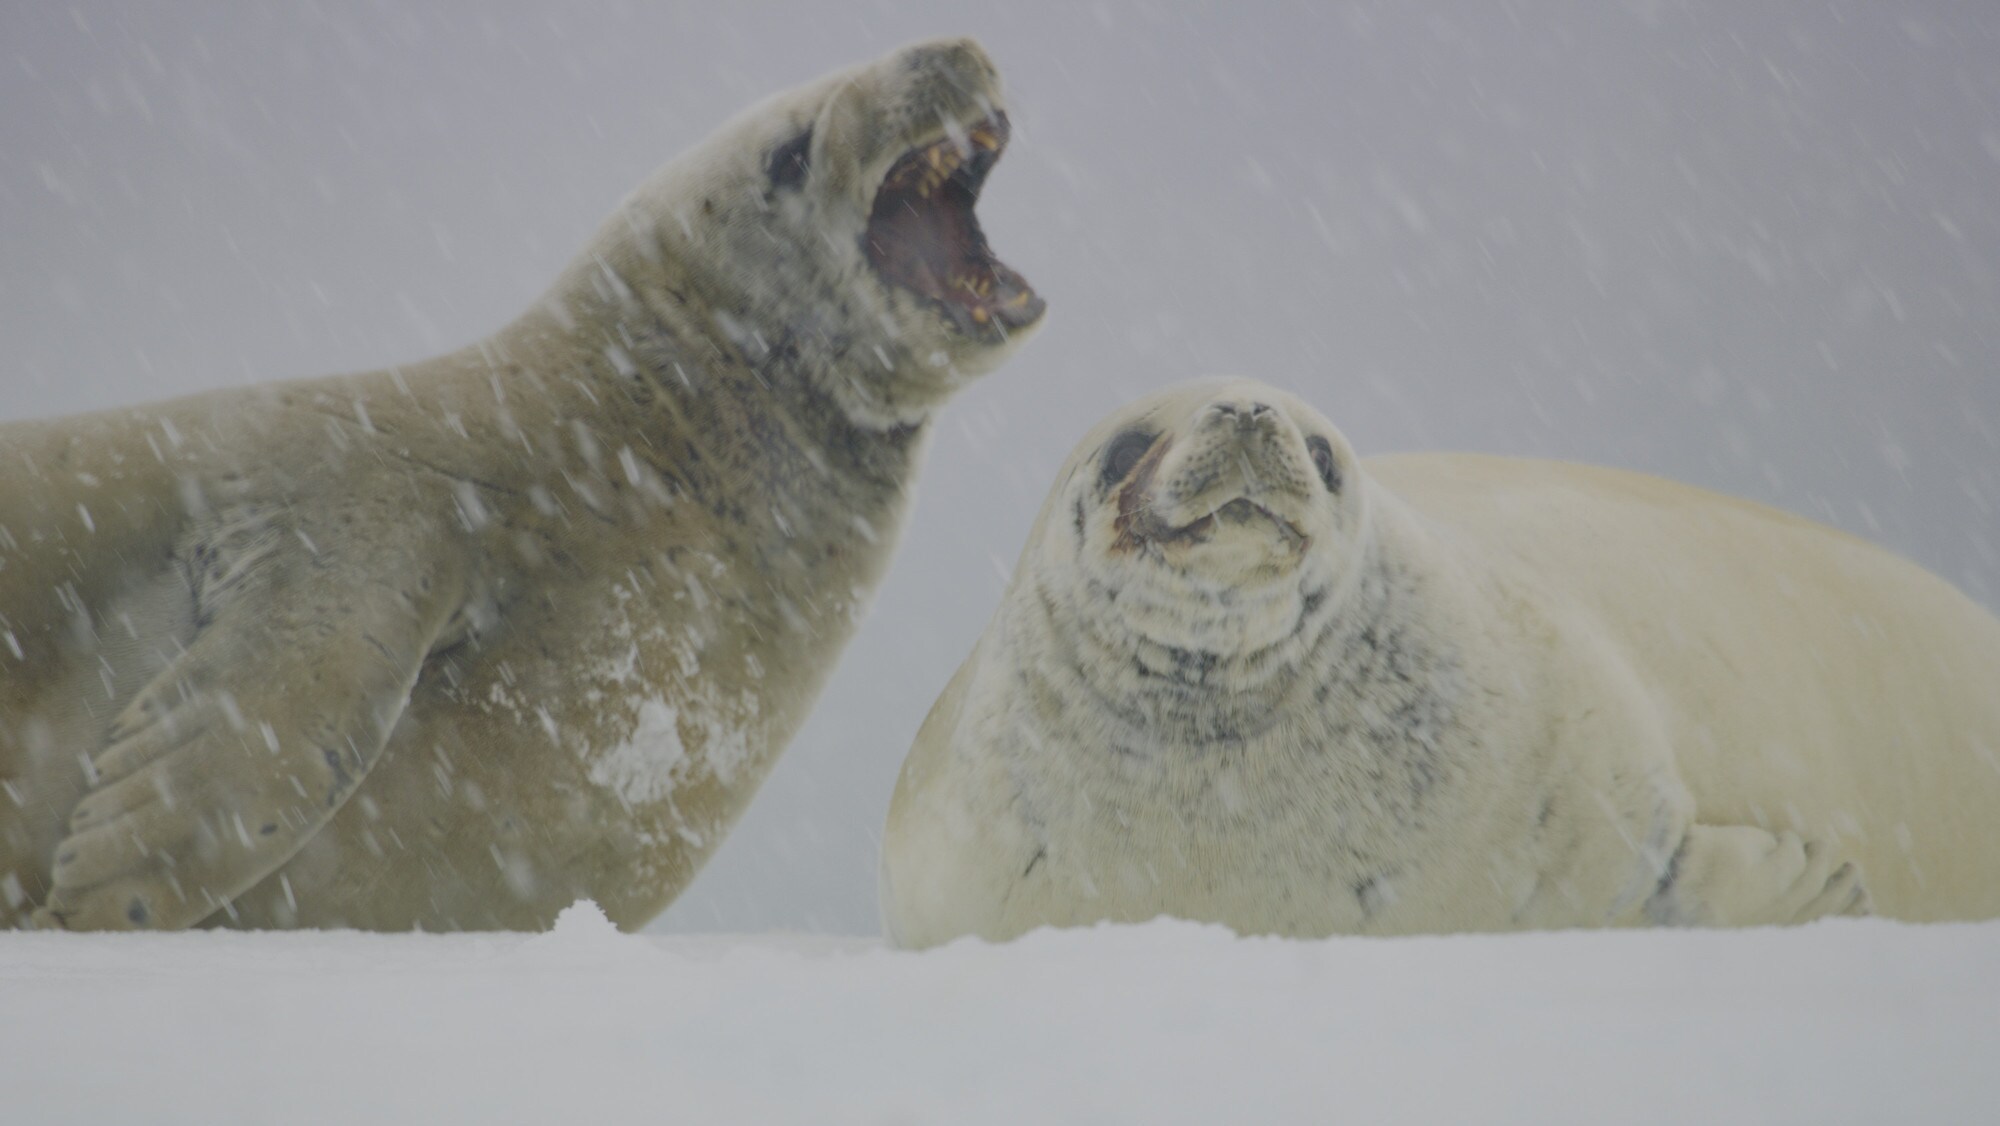 Two Weddell Seals on the snow. (credit: National Geographic for Disney+/Tom Walker)